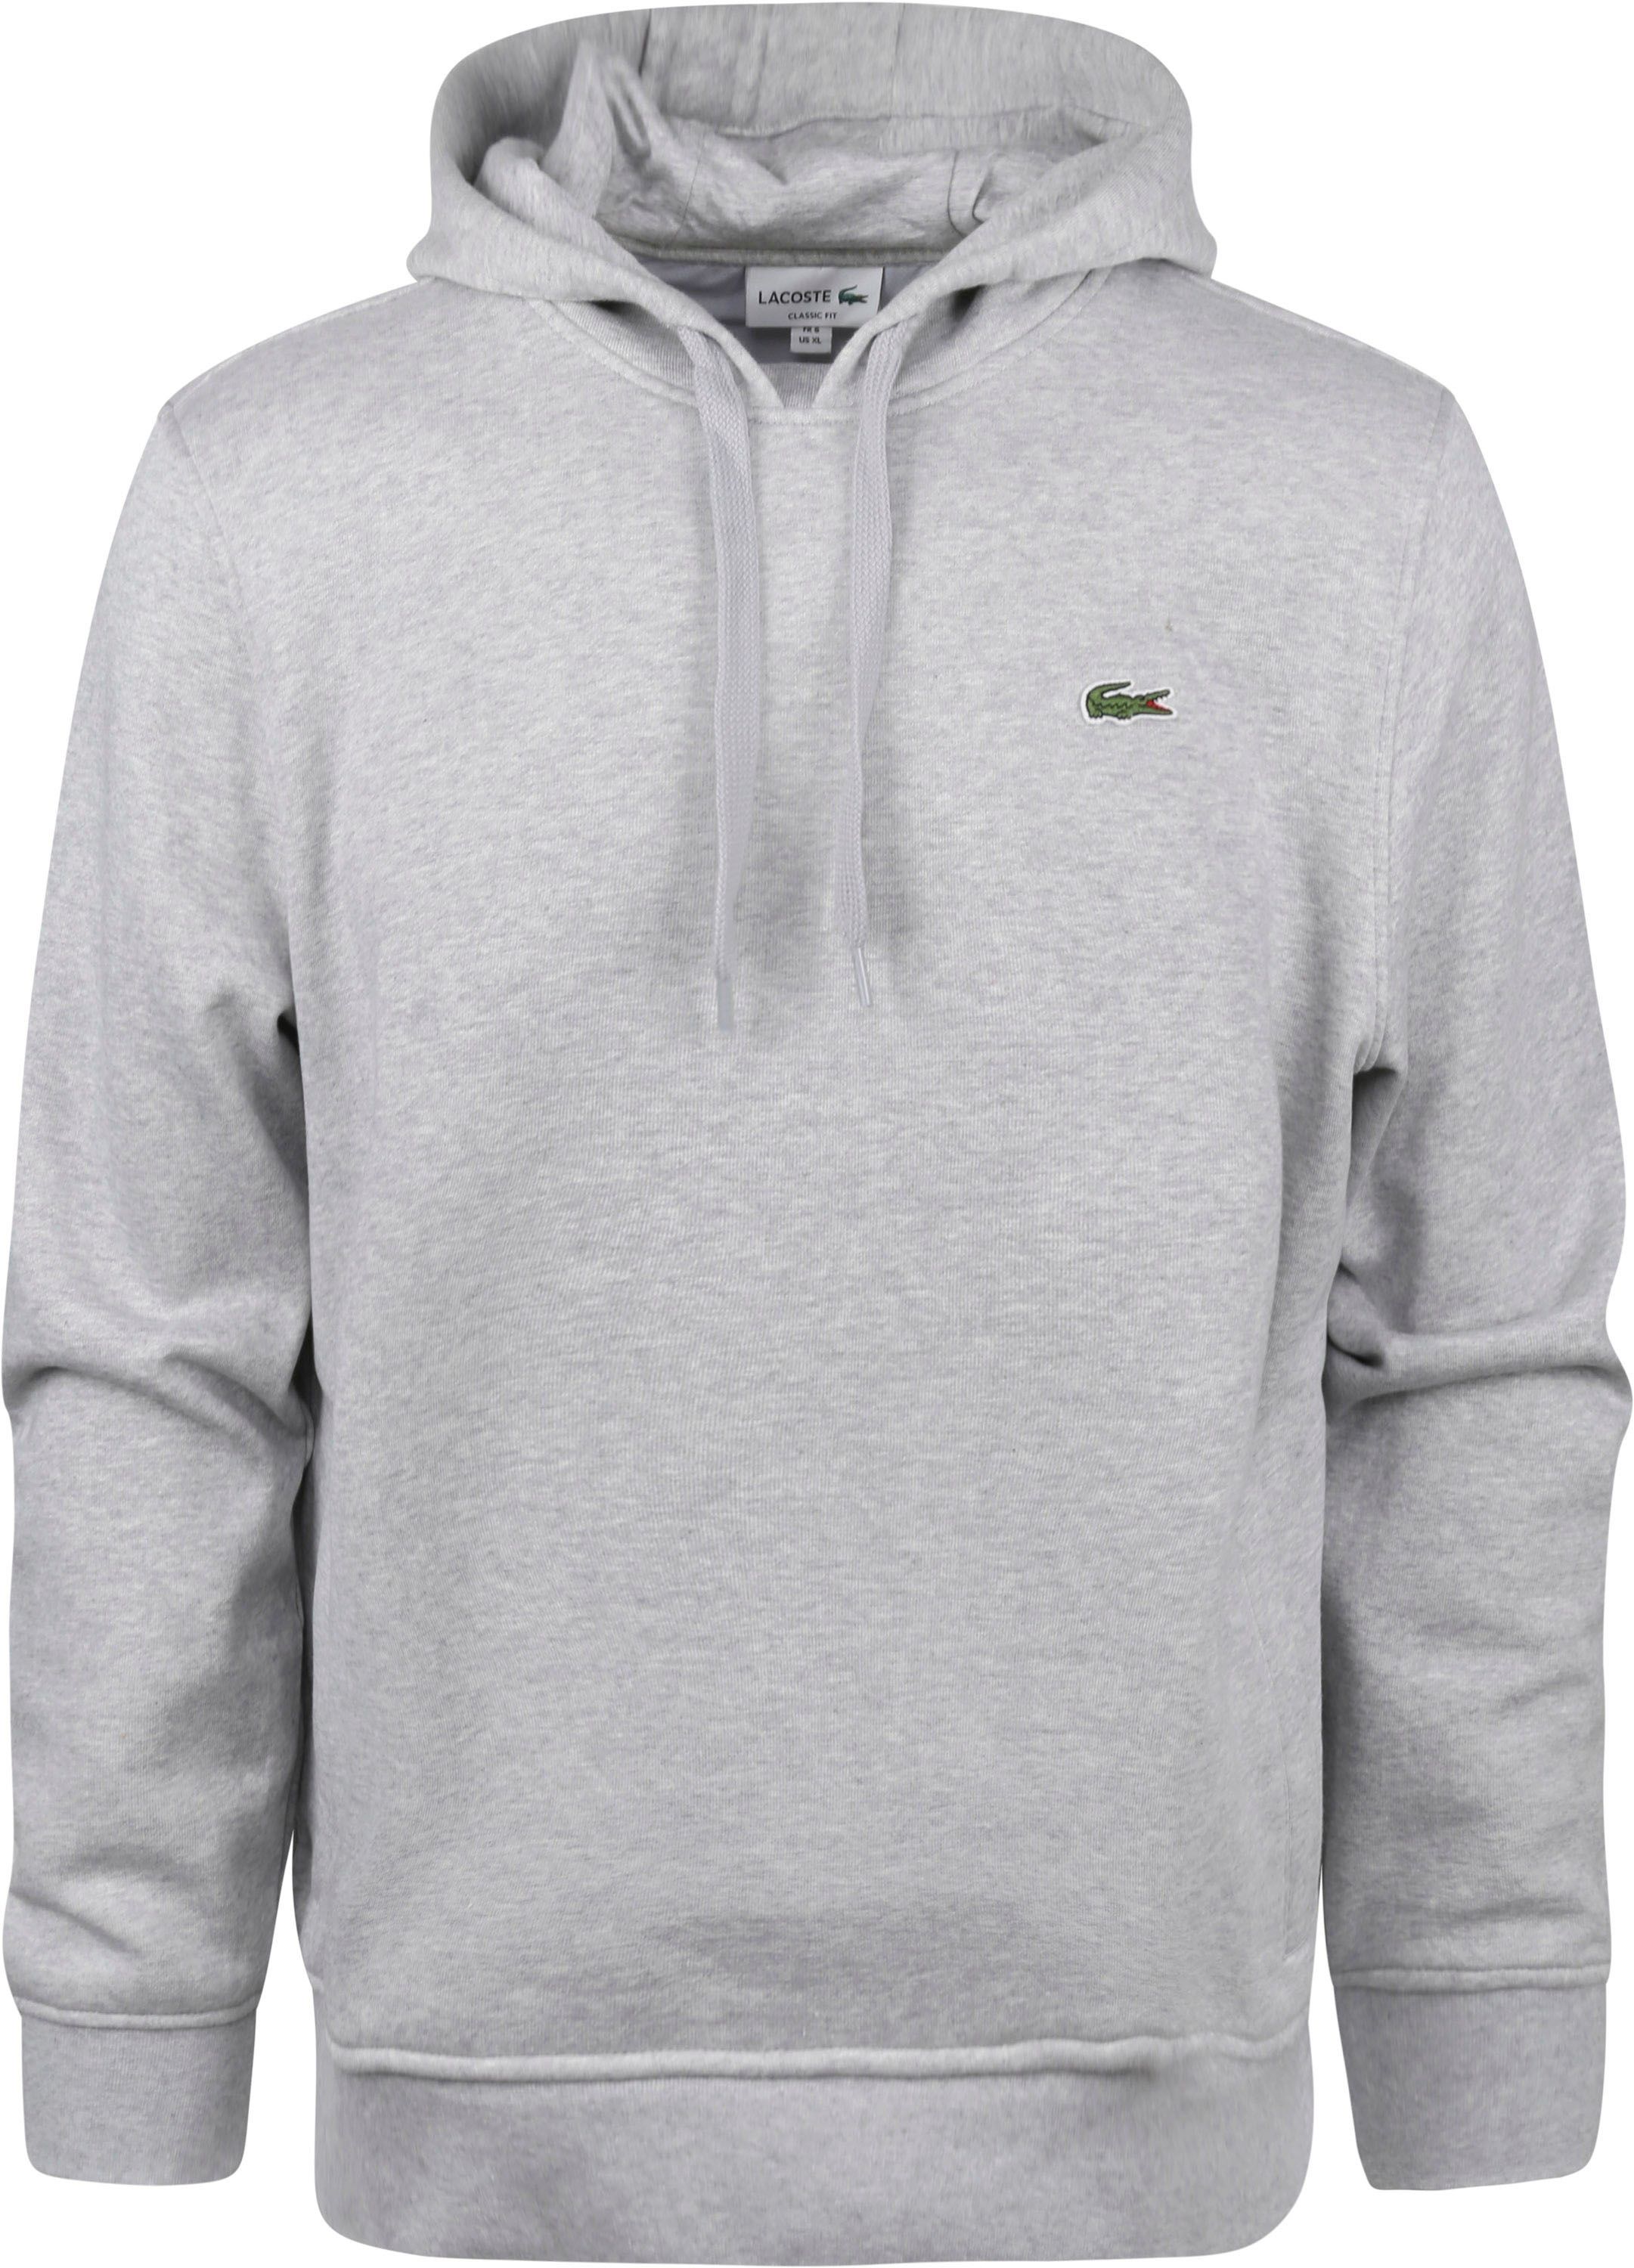 Lacoste Hoodie Gray Grey size XL